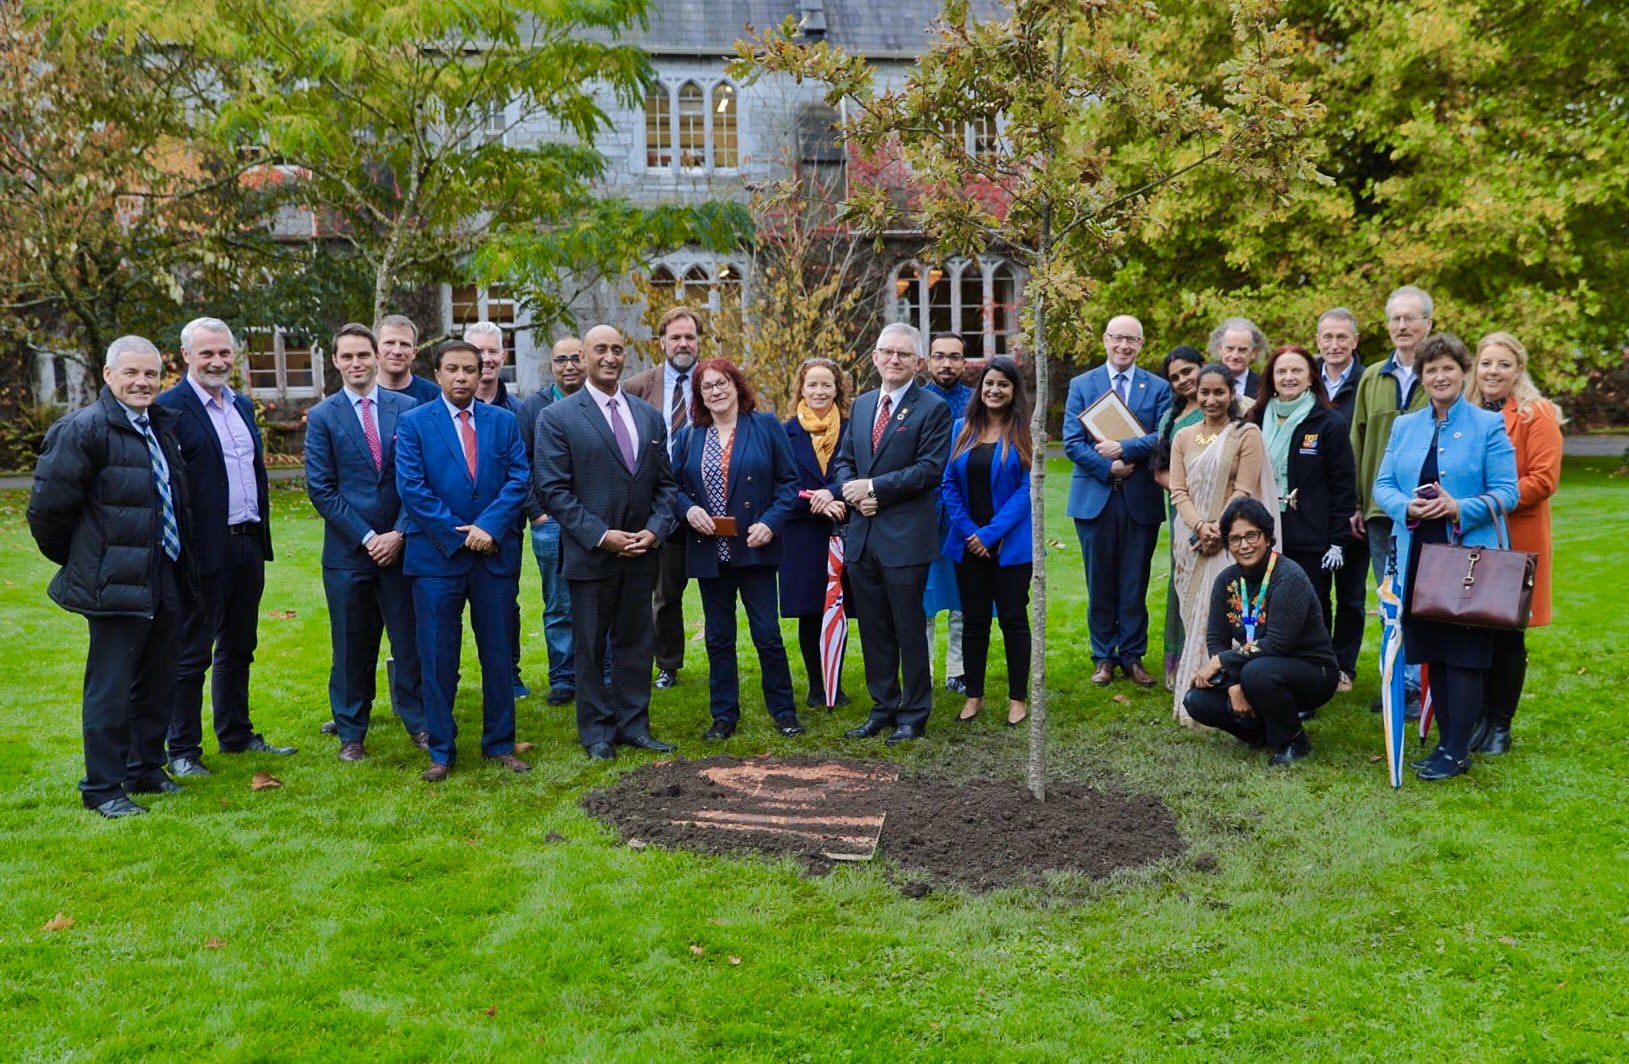 Ceremony marking 150 Years of Mahatma Gandhi hosted in UCC